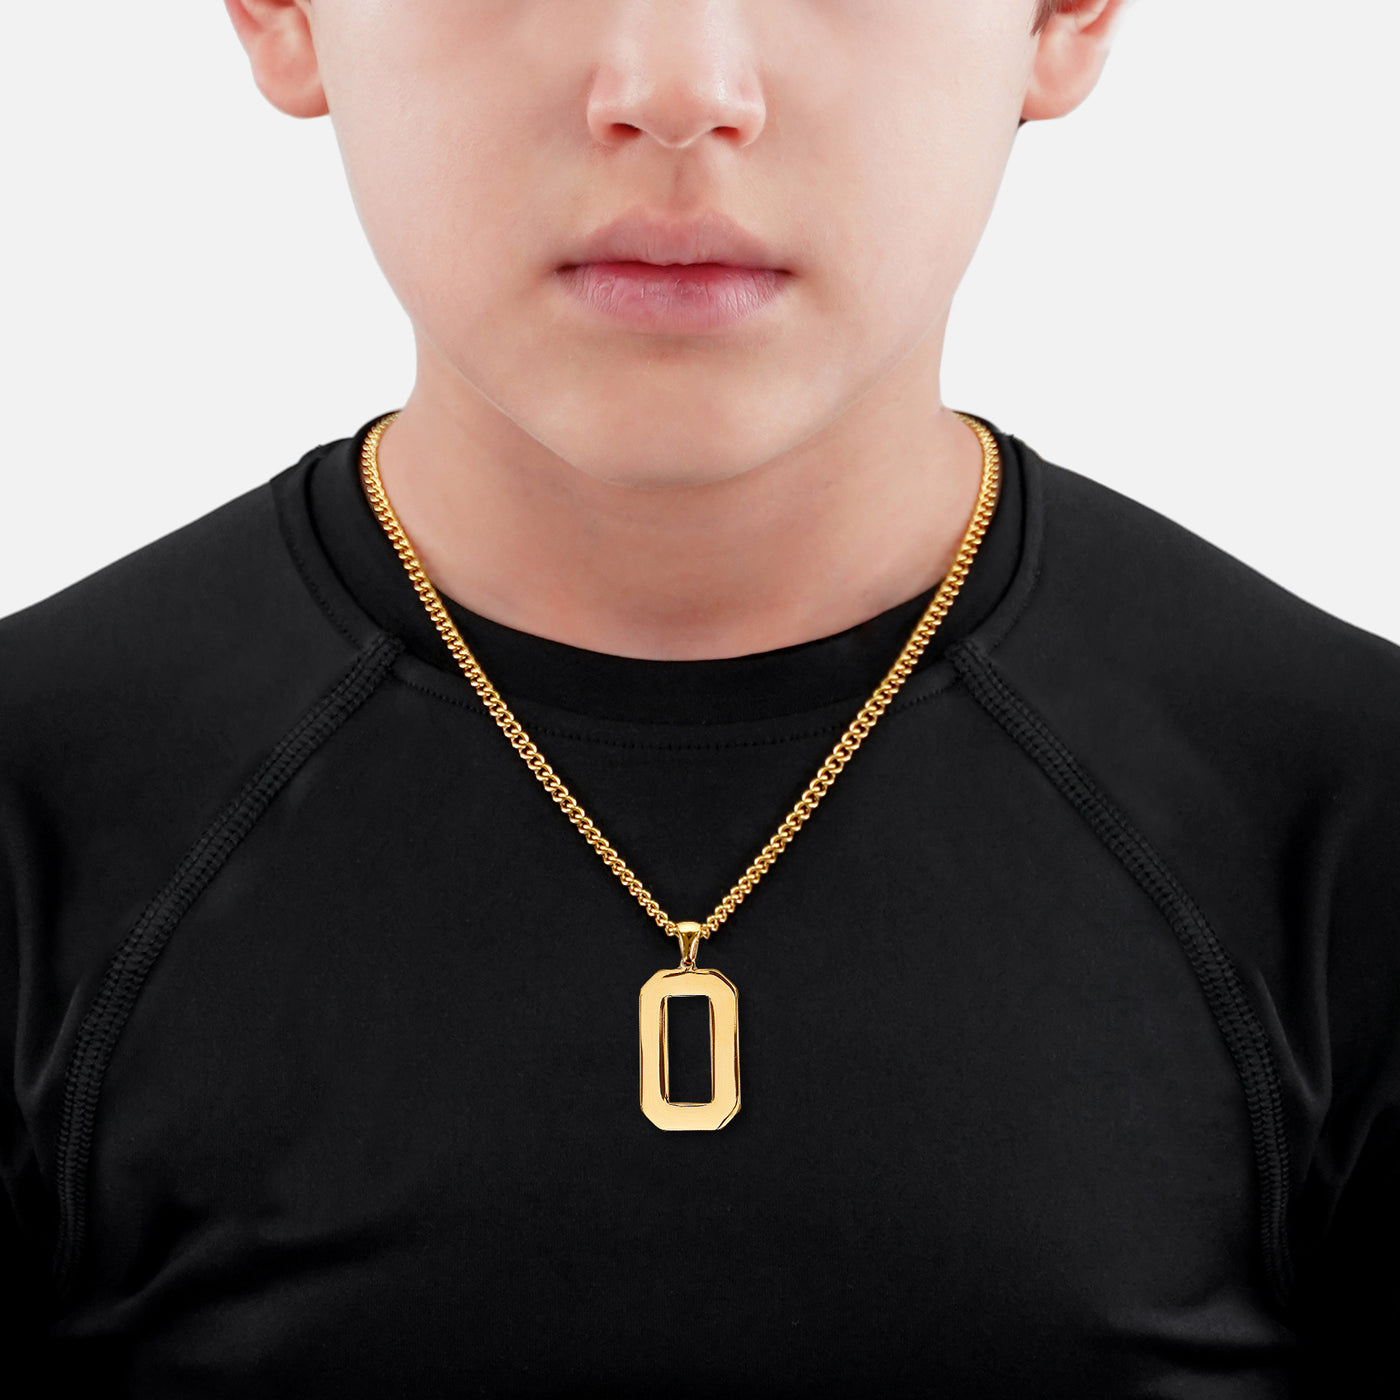 0 Number Pendant with Chain Kids Necklace - Gold Plated Stainless Steel